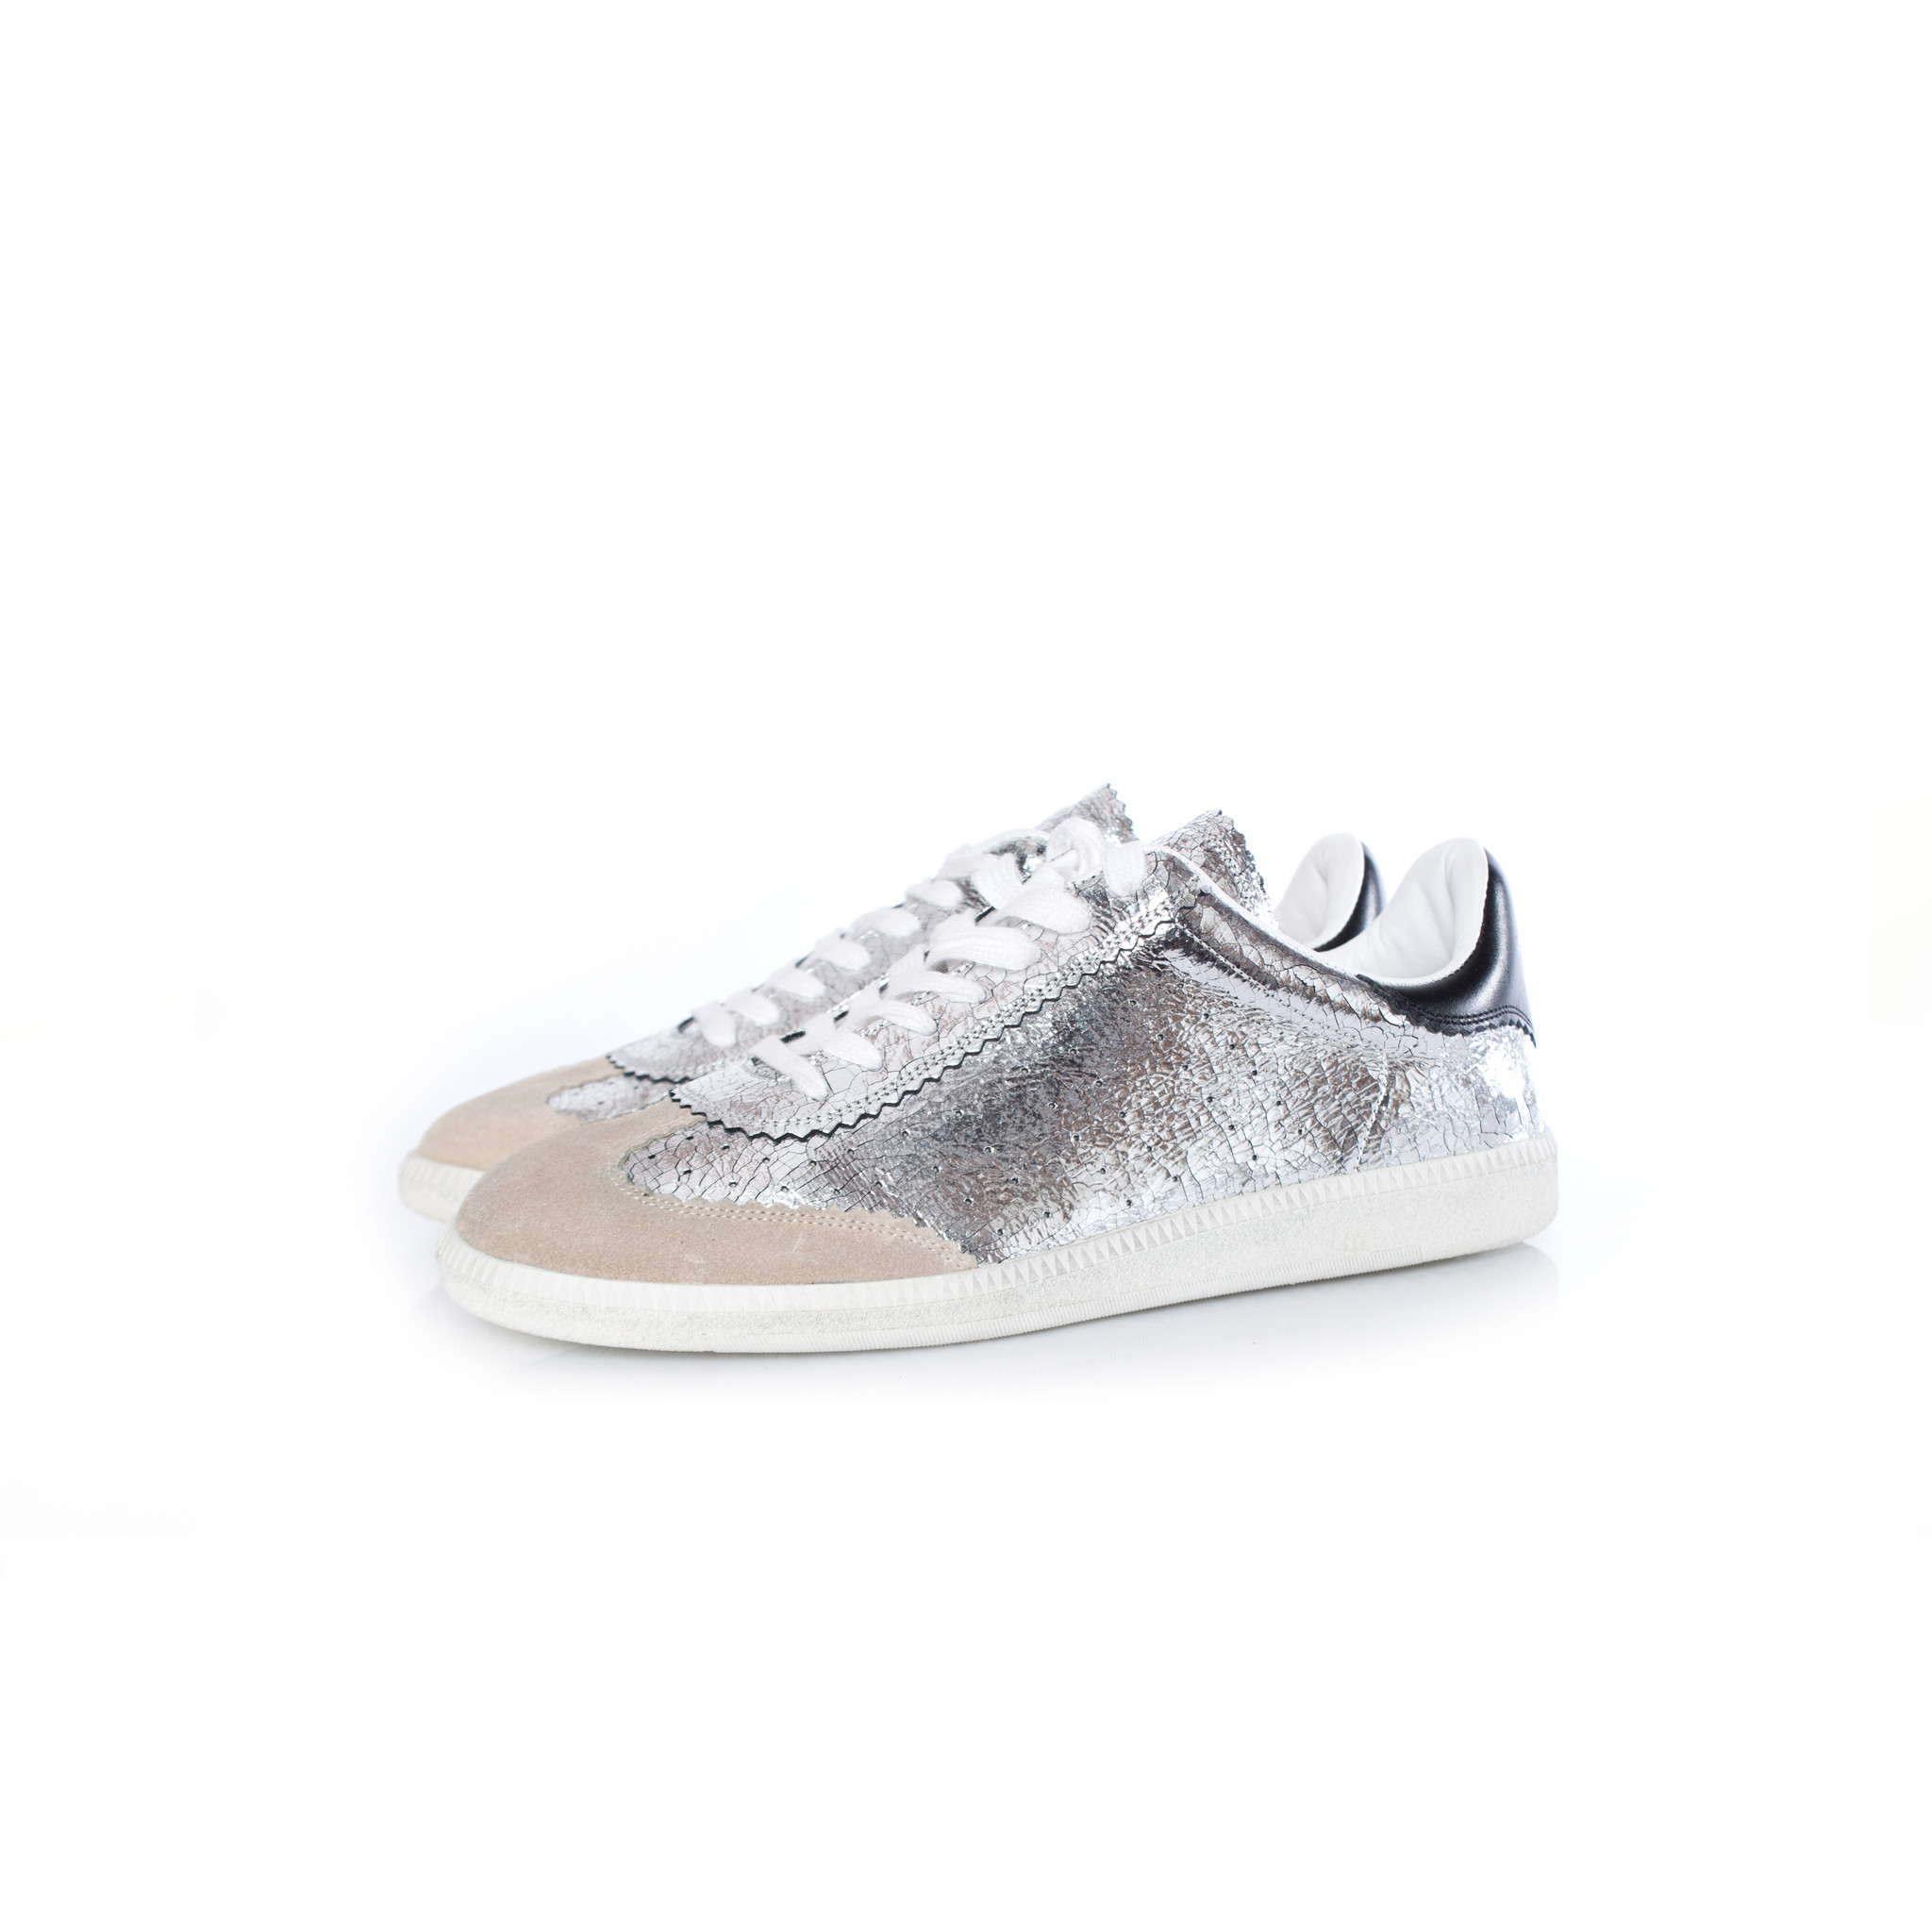 Aggregate more than 108 isabel marant bryce sneakers